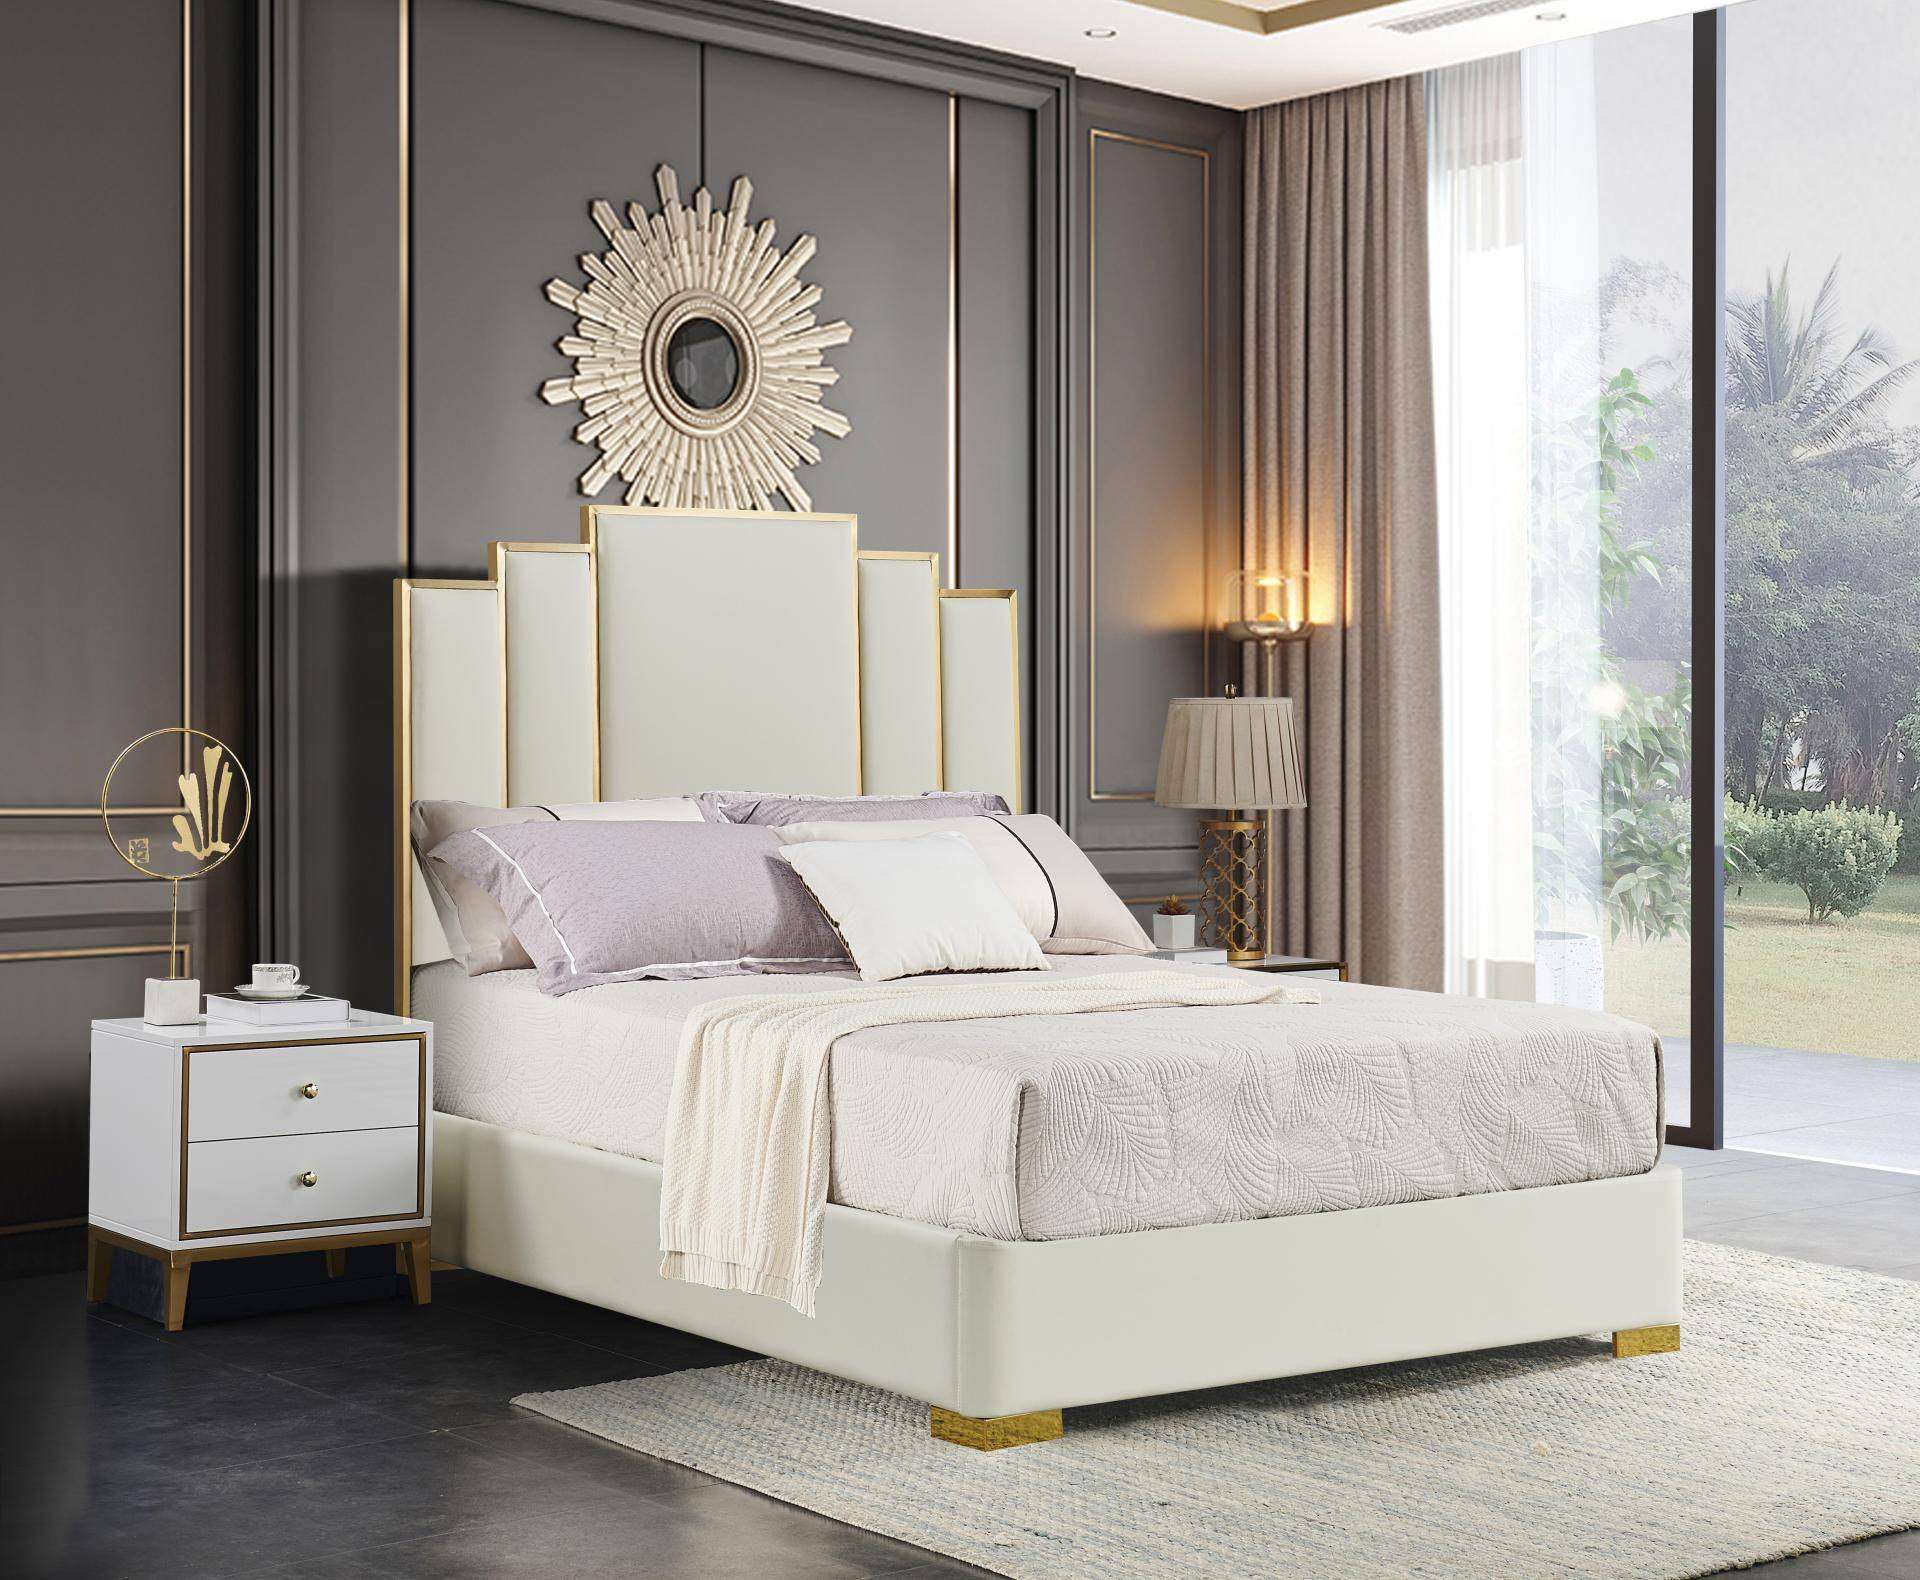 2021 Hot Sale Luxury Beds Online | Have you got it? 